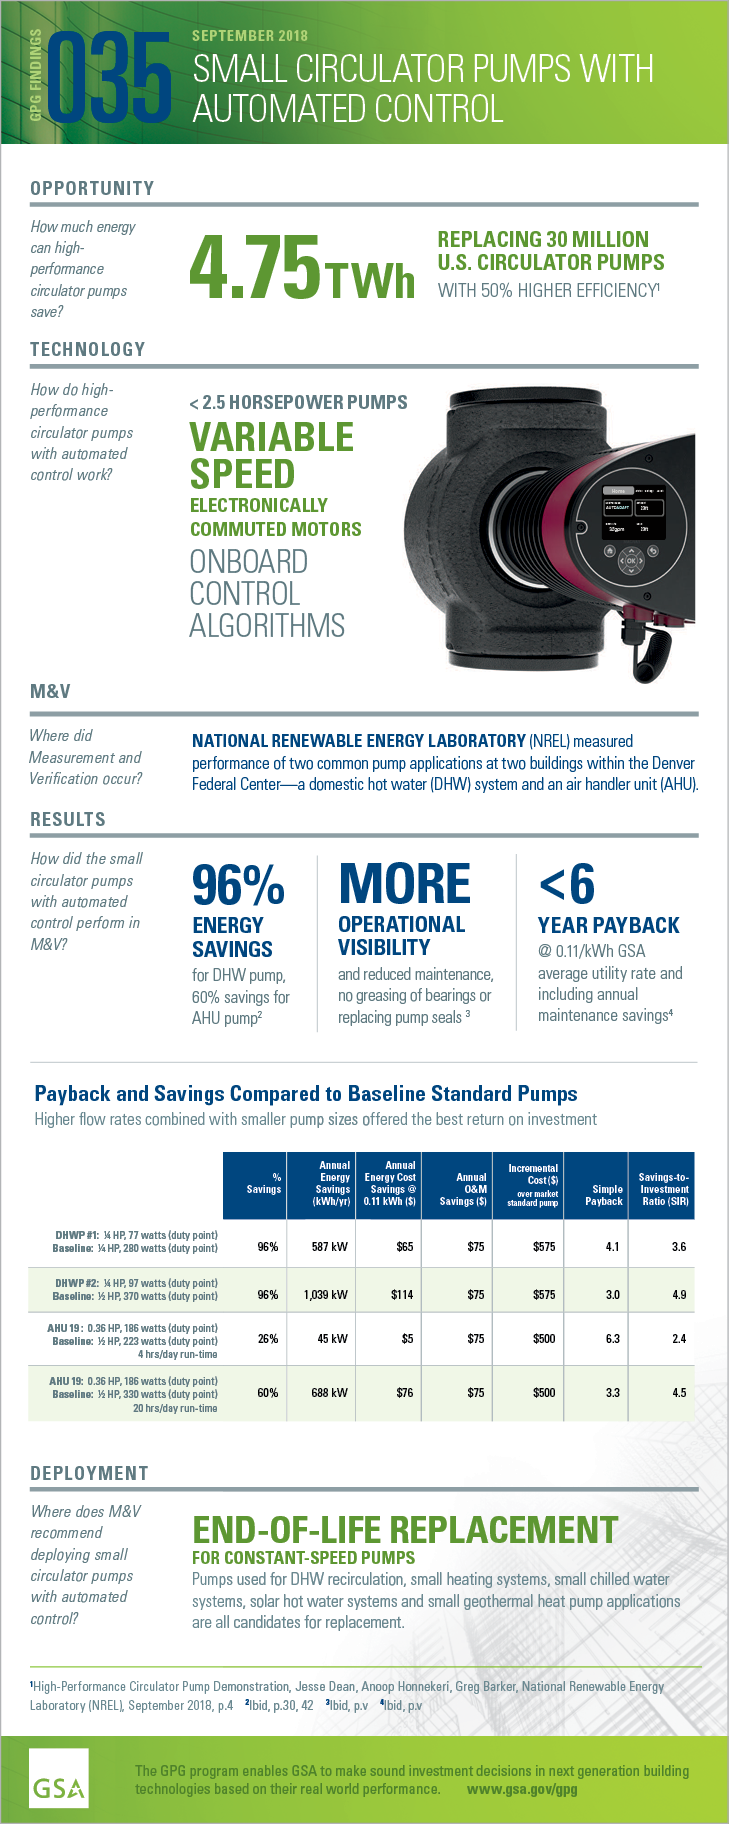 Download the PDF of the full-size infographic for GPG035 Small Circulator Pumps.